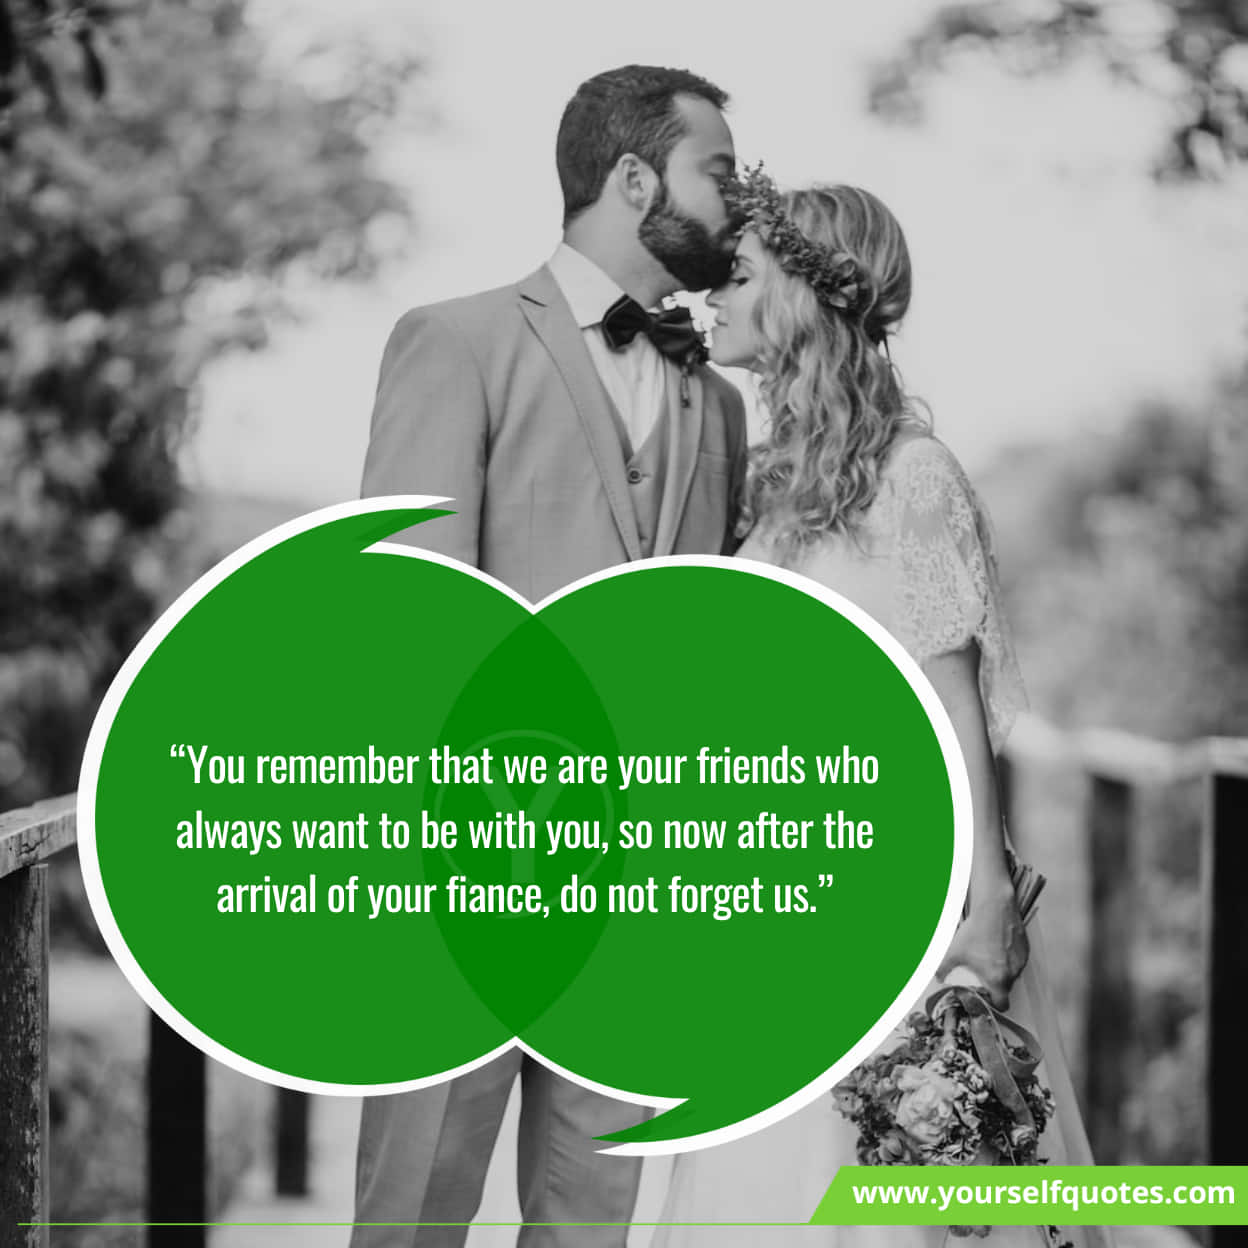 Sayings For Engagement Wishes